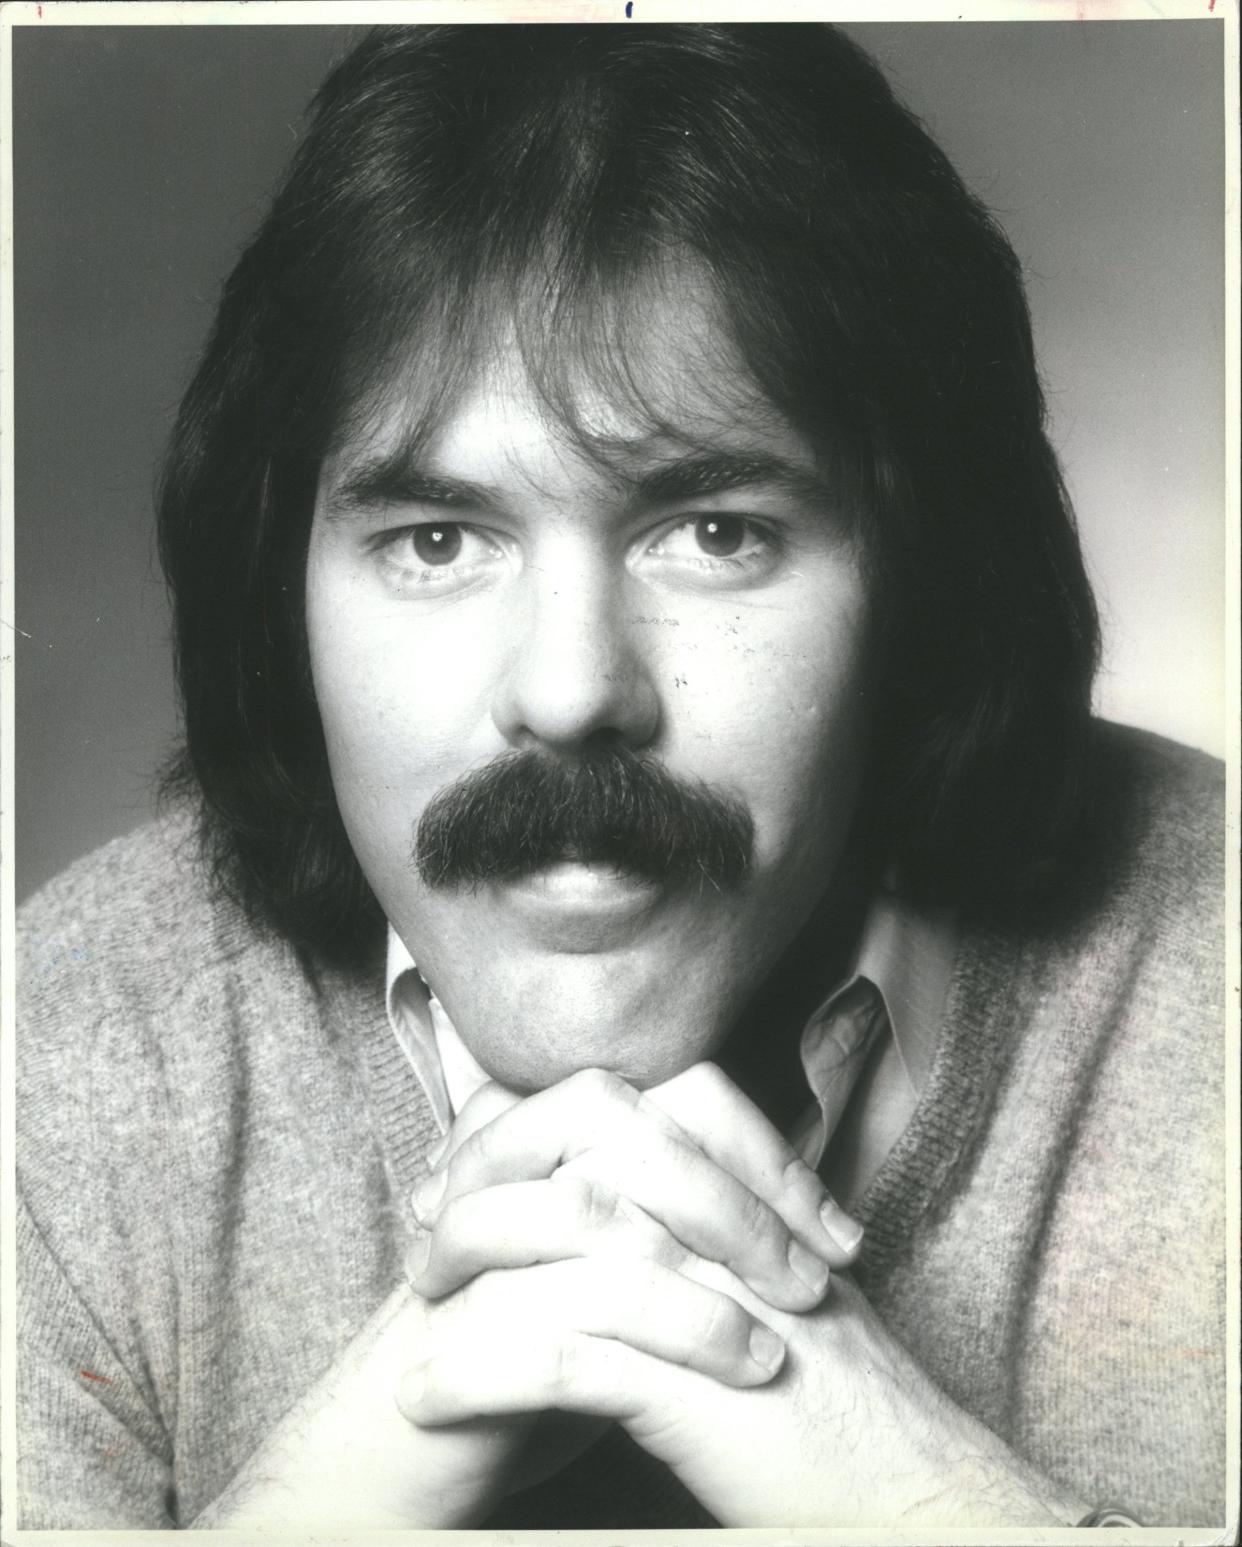 Ken Calvert's career in Detroit radio covered more than four decades and six major stations.